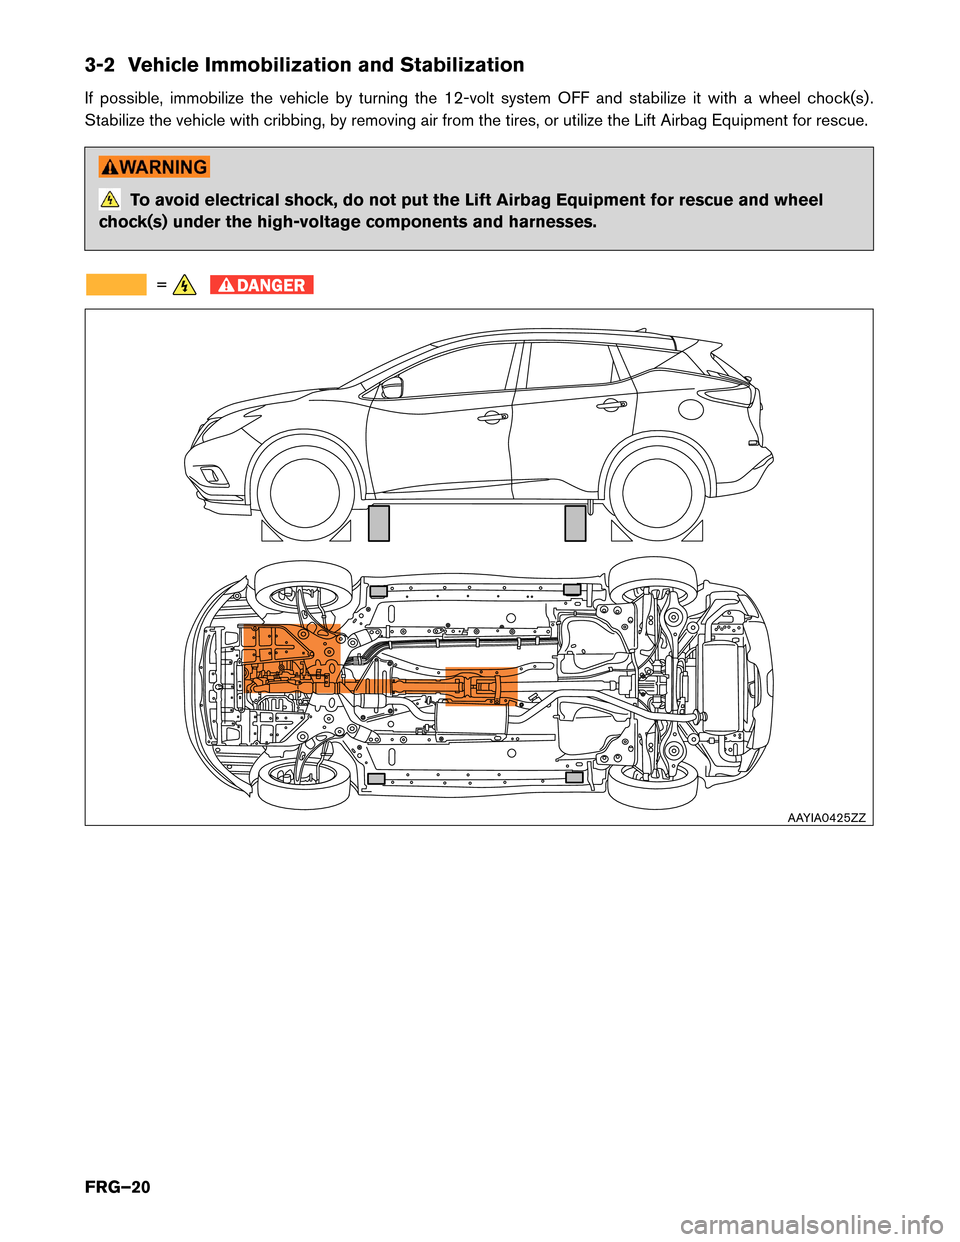 NISSAN MURANO HYBRID 2016 3.G First Responders Guide 3-2 Vehicle Immobilization and StabilizationIf possible, immobilize the vehicle by turning the 12-volt system OFF and stabilize it with a wheel chock(s) .
Stabilize the vehicle with cribbing, by remov